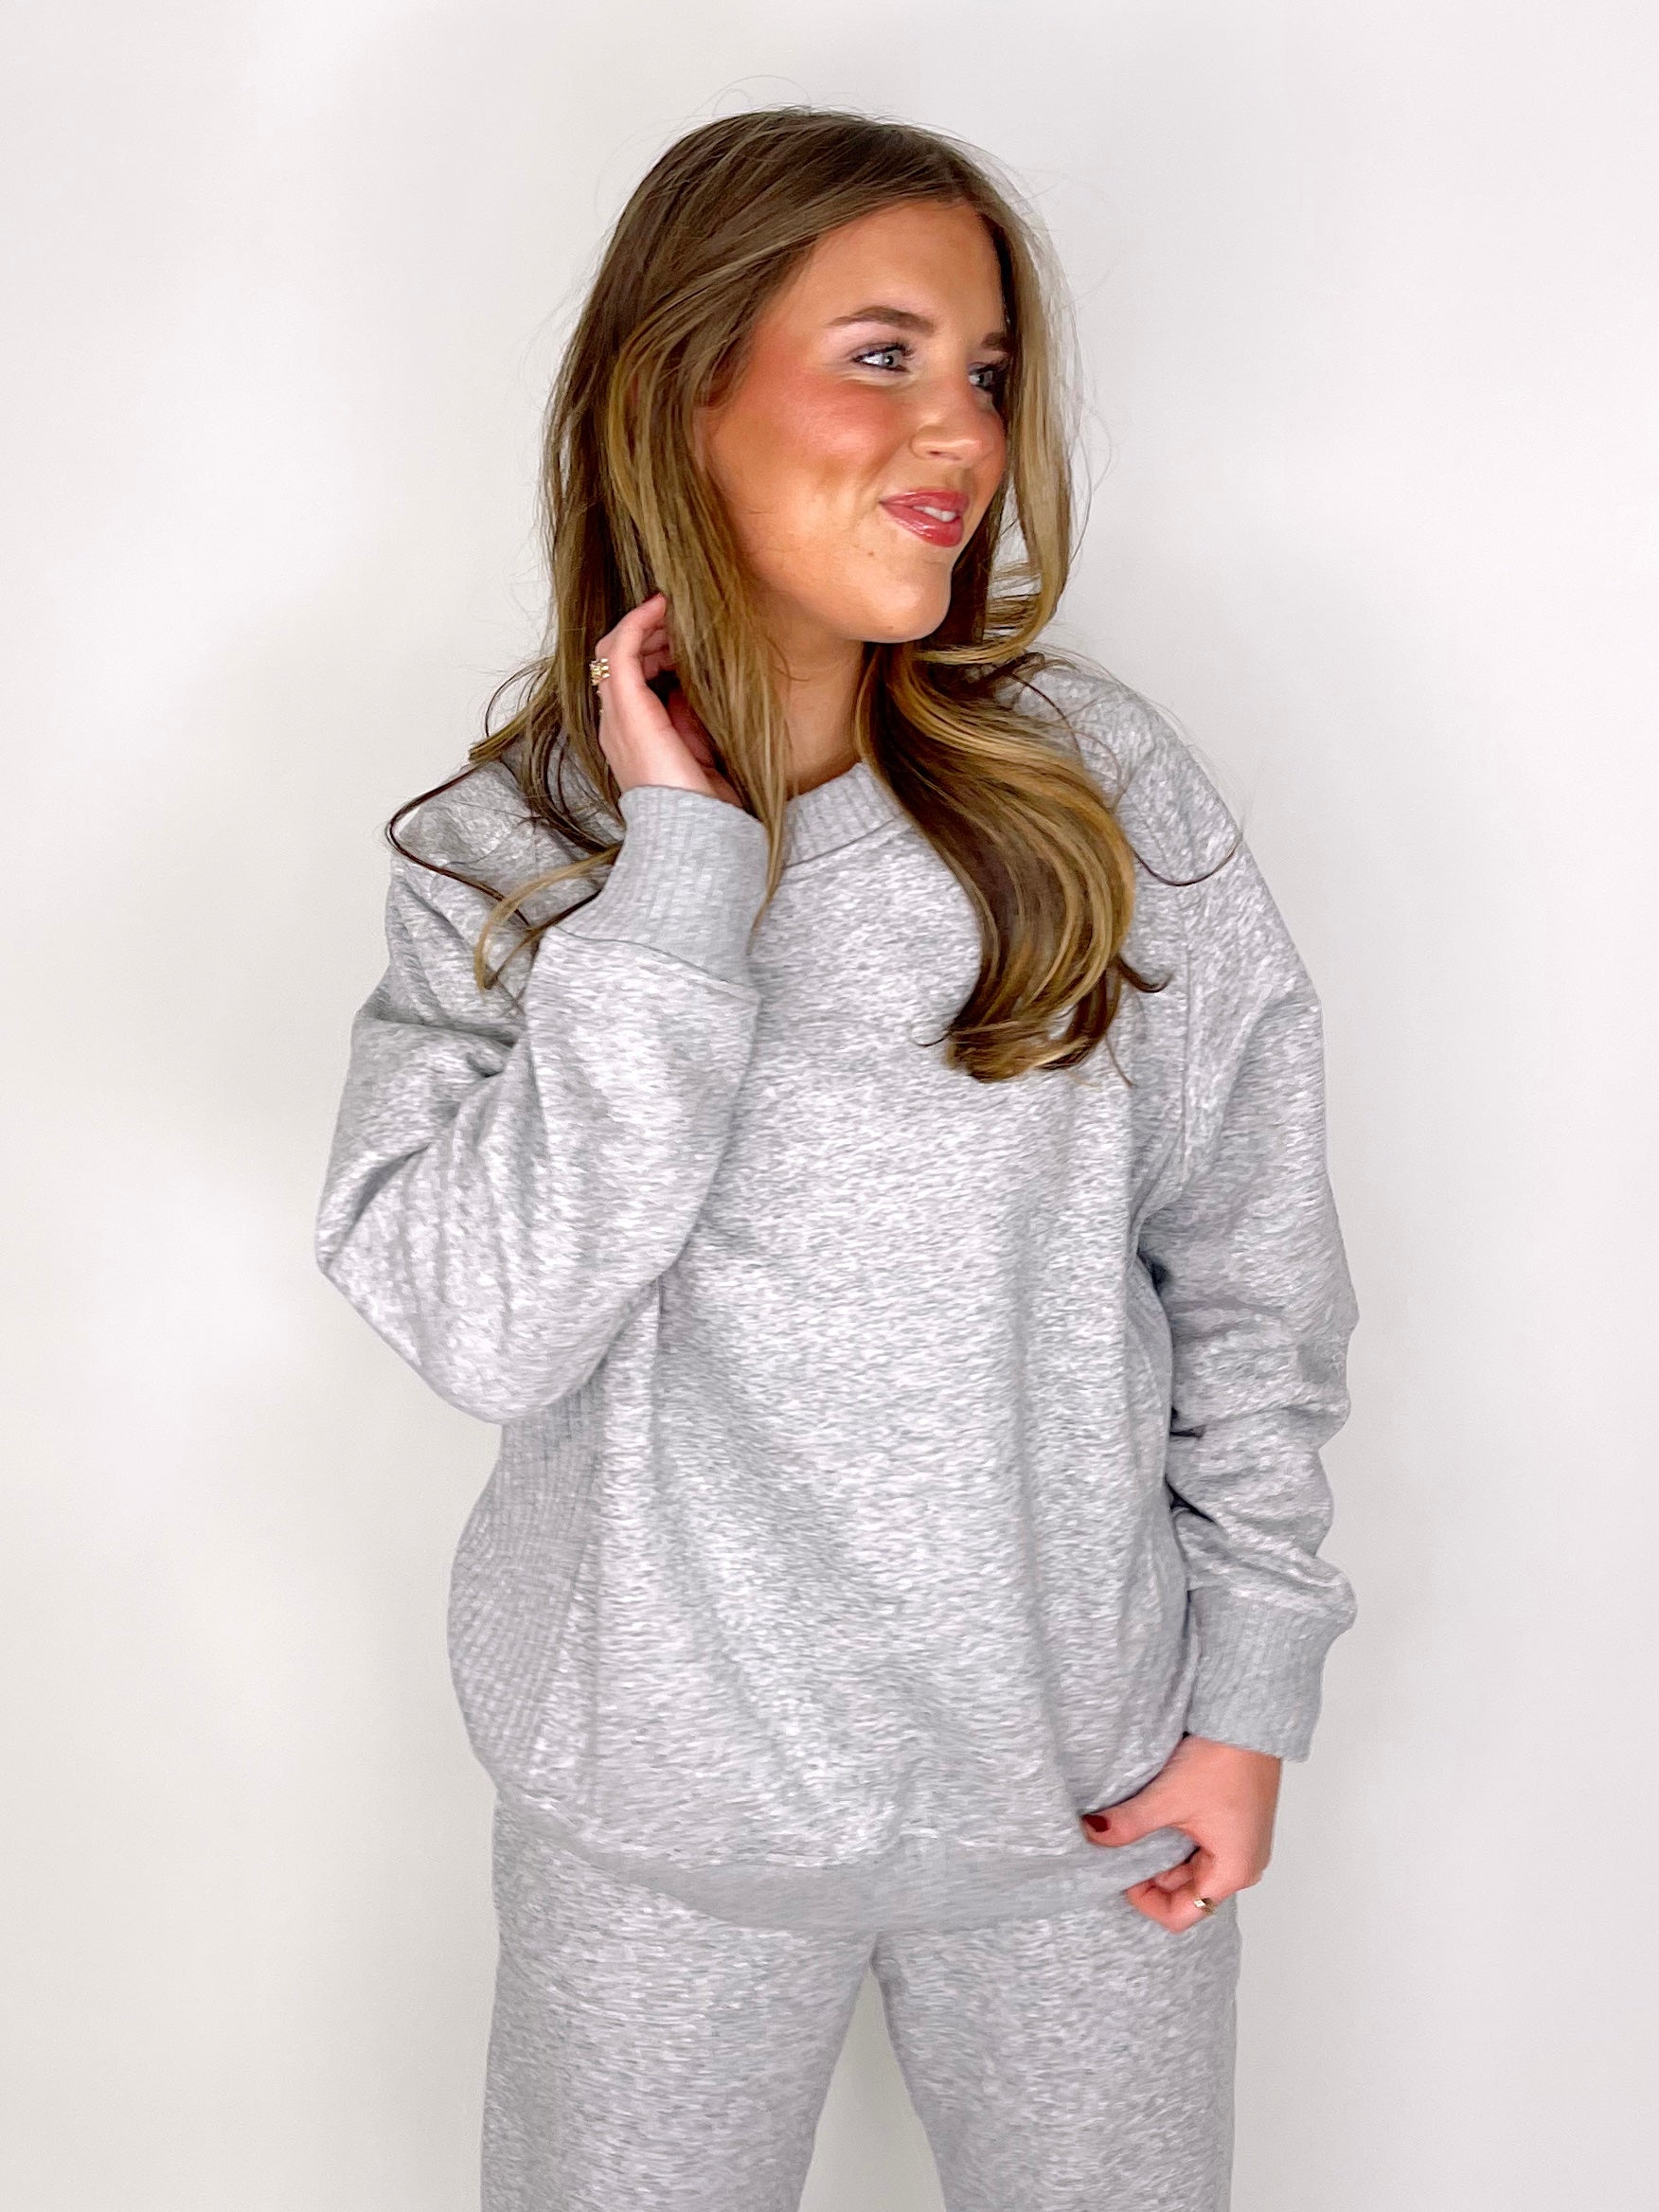 The Tate Sweatshirt-Sweatshirt-Rae Mode-The Village Shoppe, Women’s Fashion Boutique, Shop Online and In Store - Located in Muscle Shoals, AL.